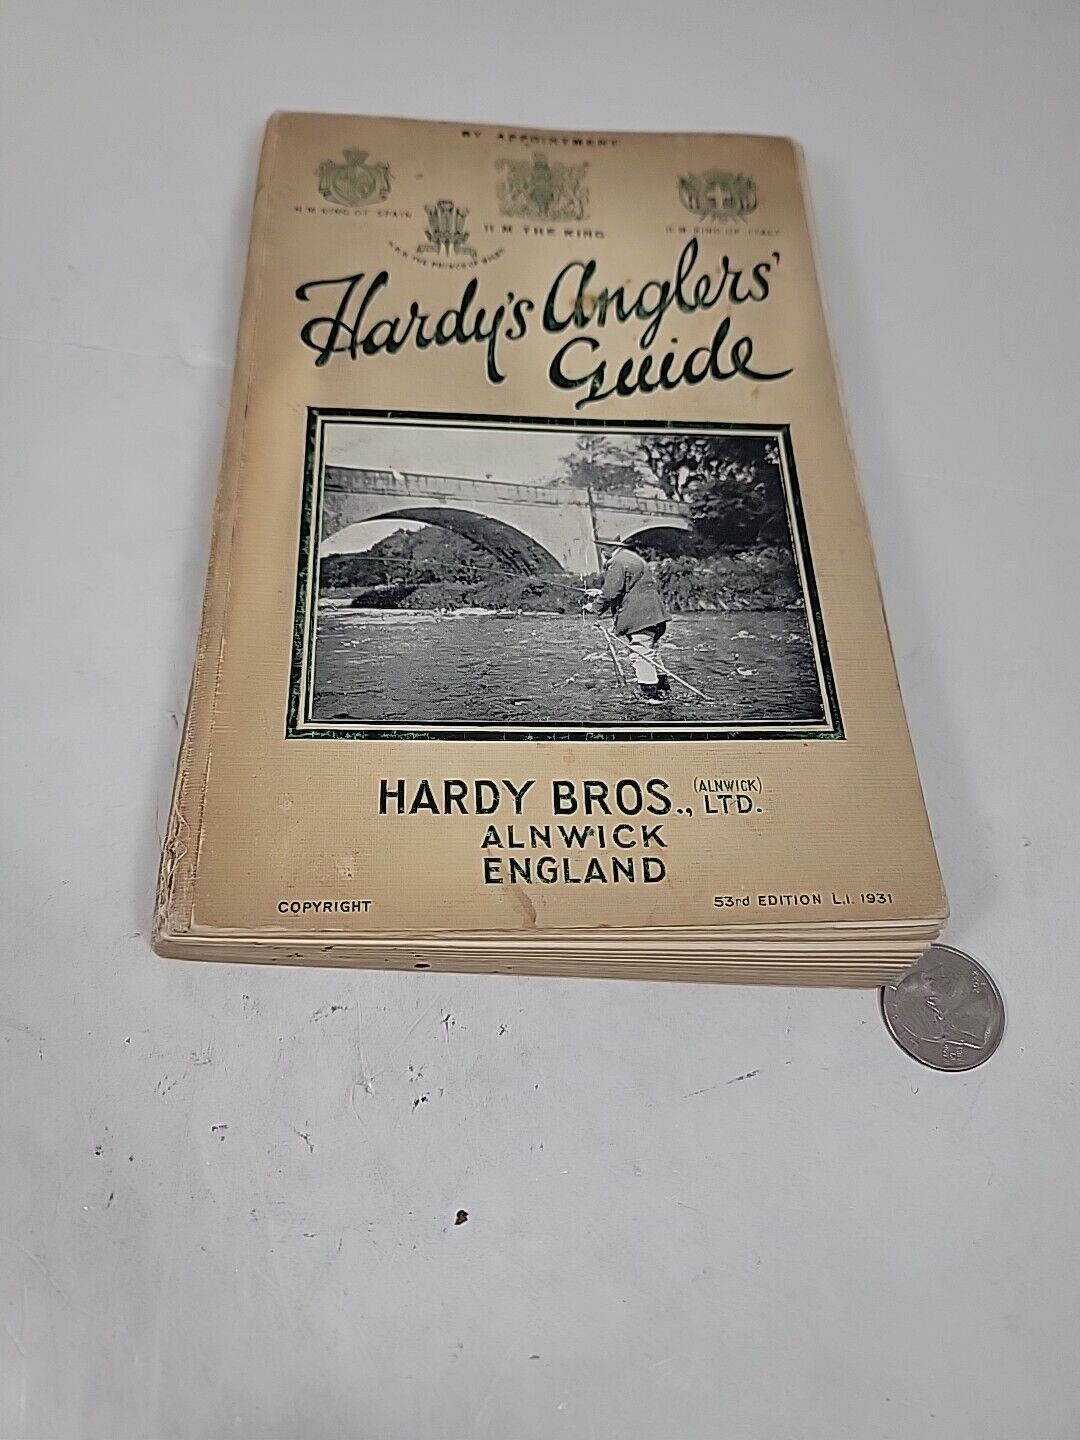 Hardy Bros ltd England anglers guide 53rd edition 1931 395 pages GOOD book RARE